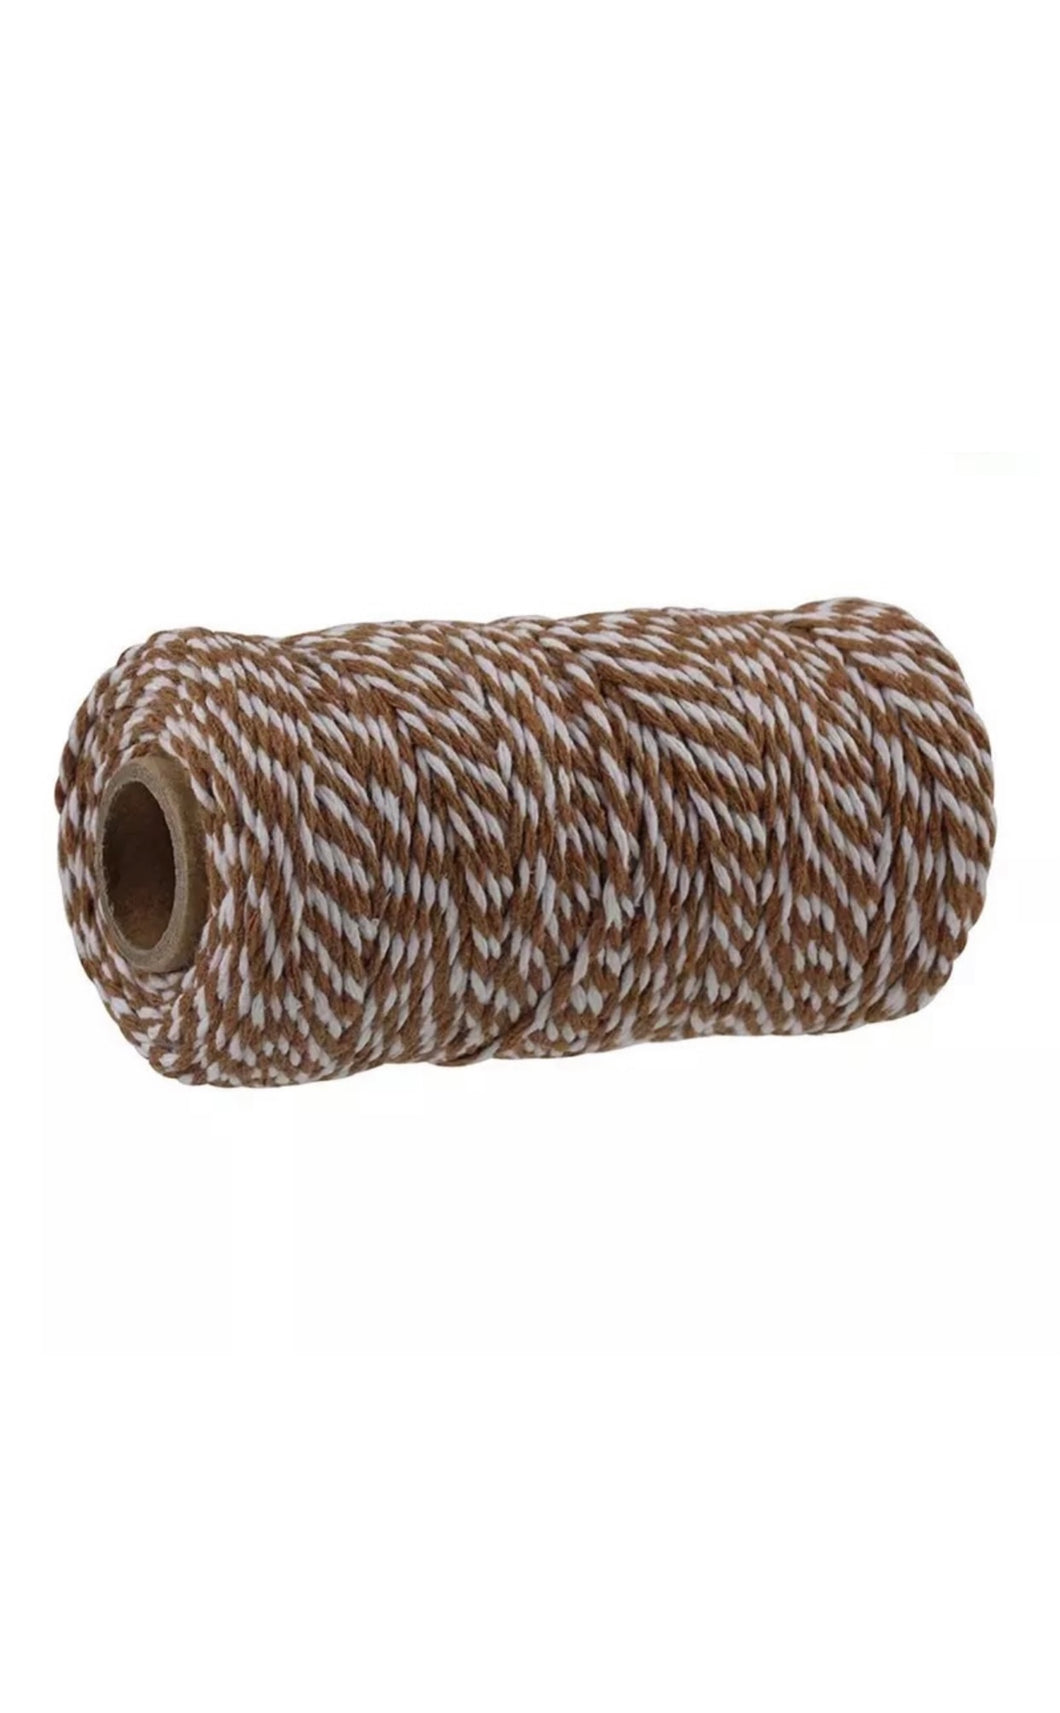 Bakers Twine 100m - Brown/White